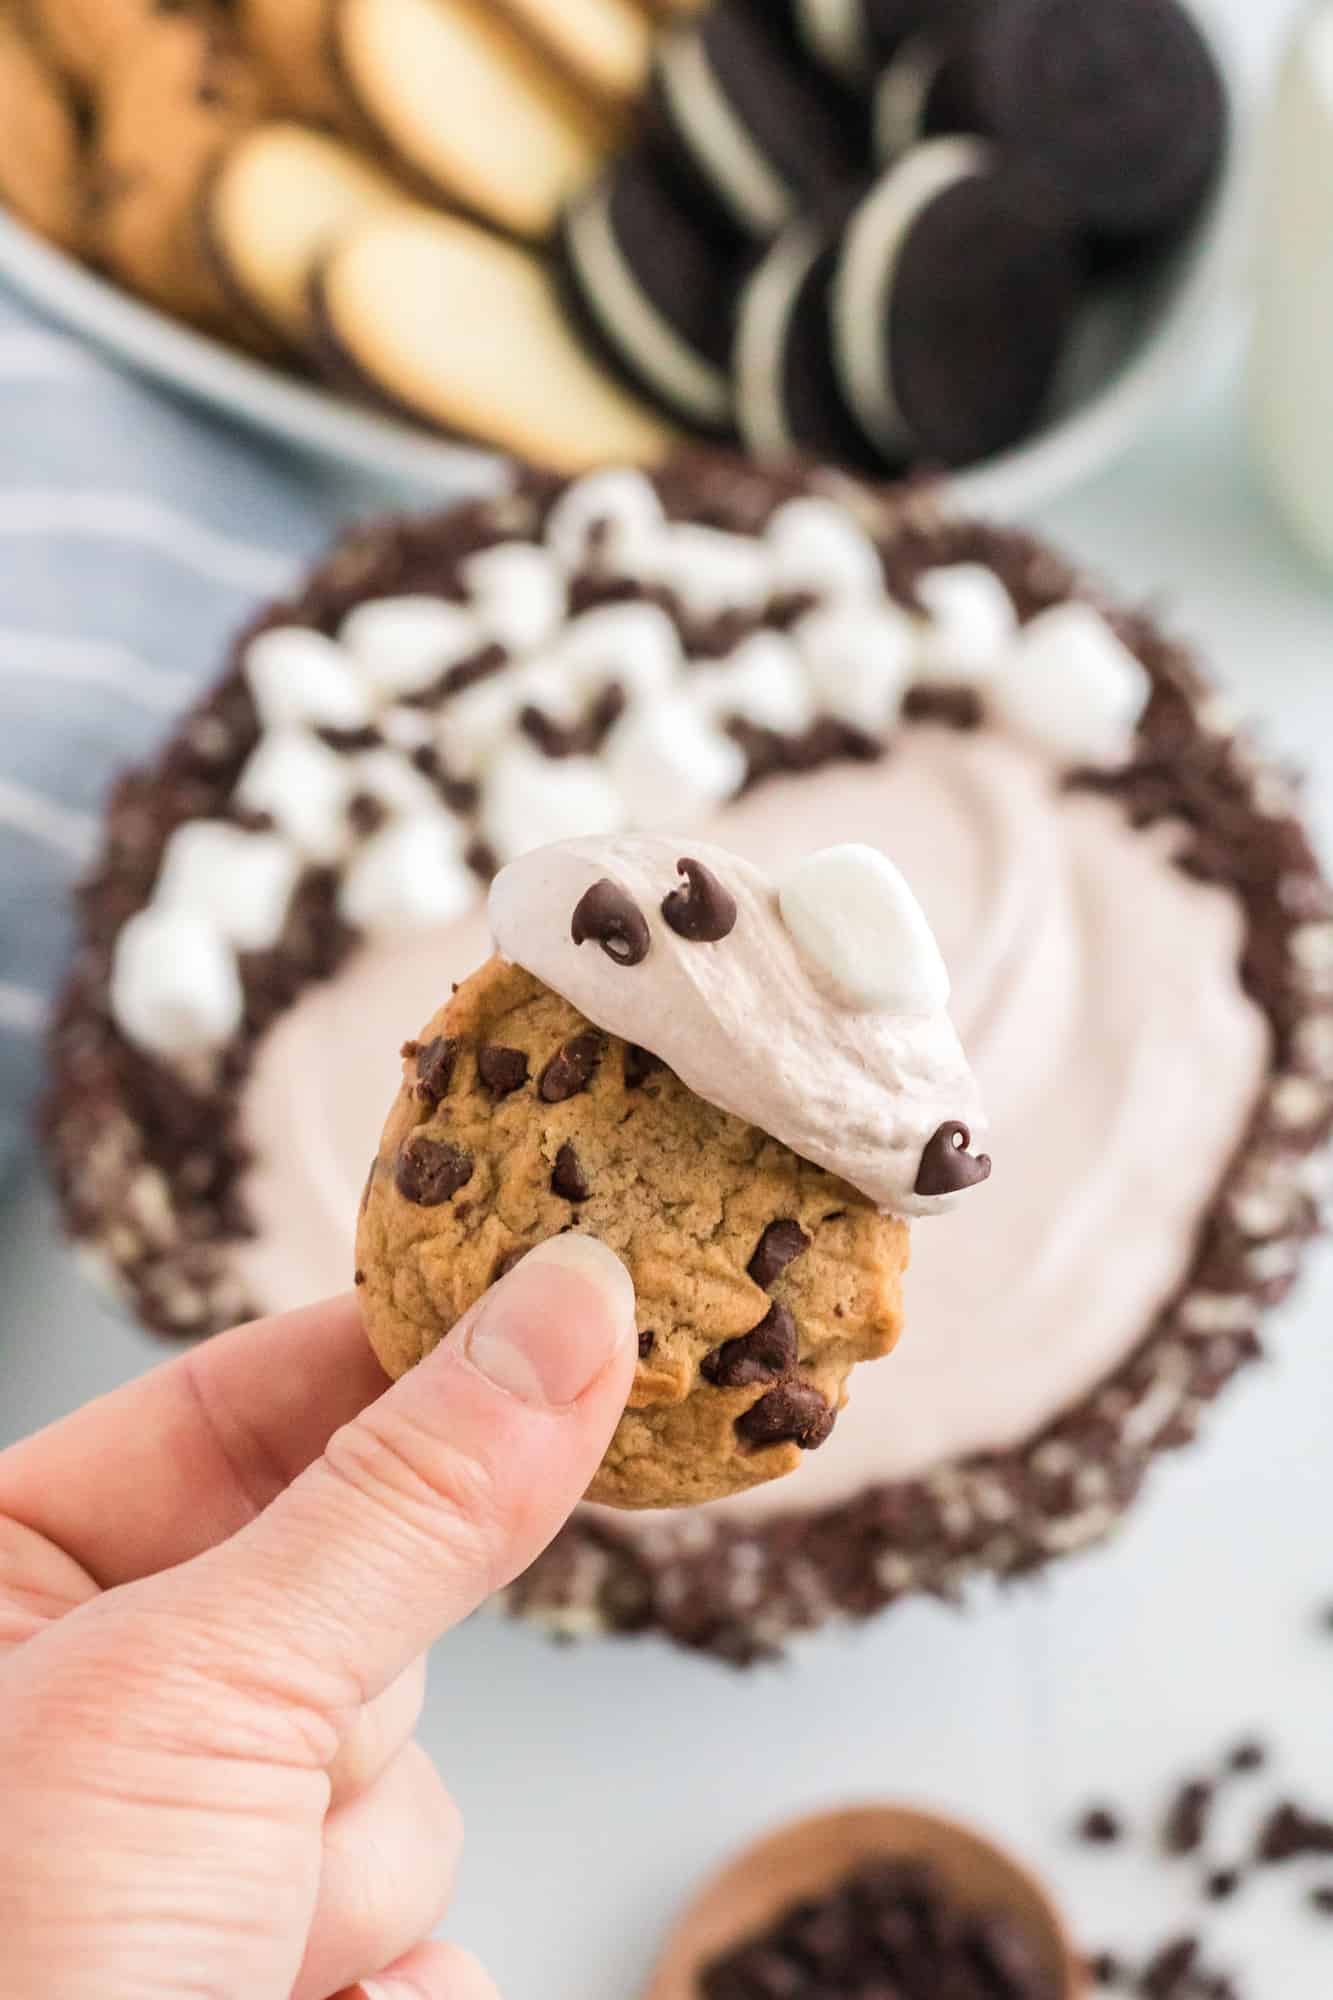 Chocolate chip cookie dipped in light brown fluffy dip.